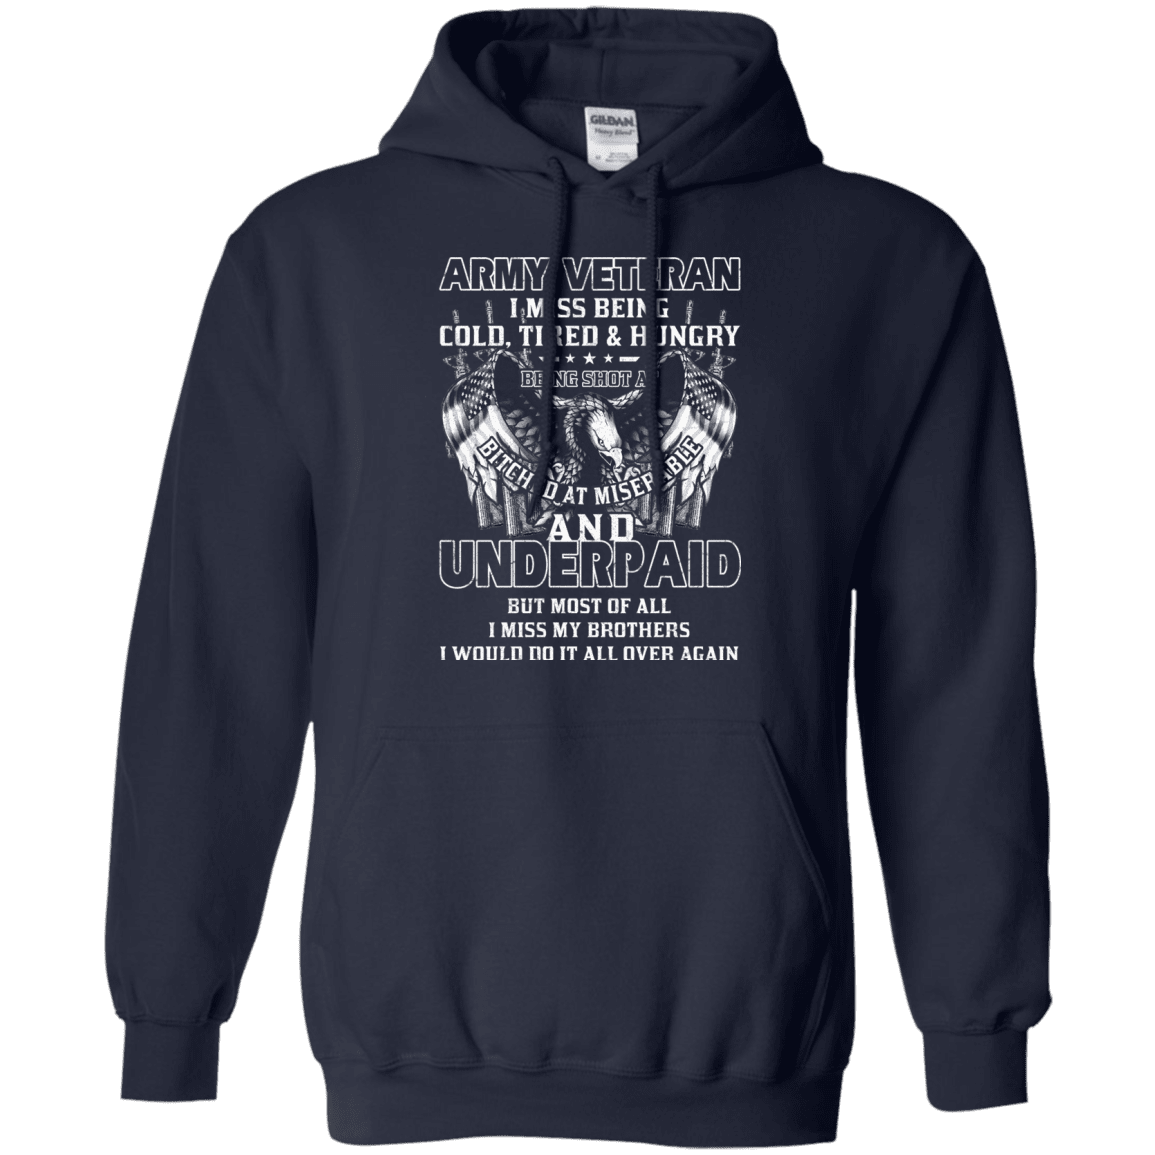 Army Veteran Underpaid Miss My Brothers Men Front T Shirts-TShirt-Army-Veterans Nation